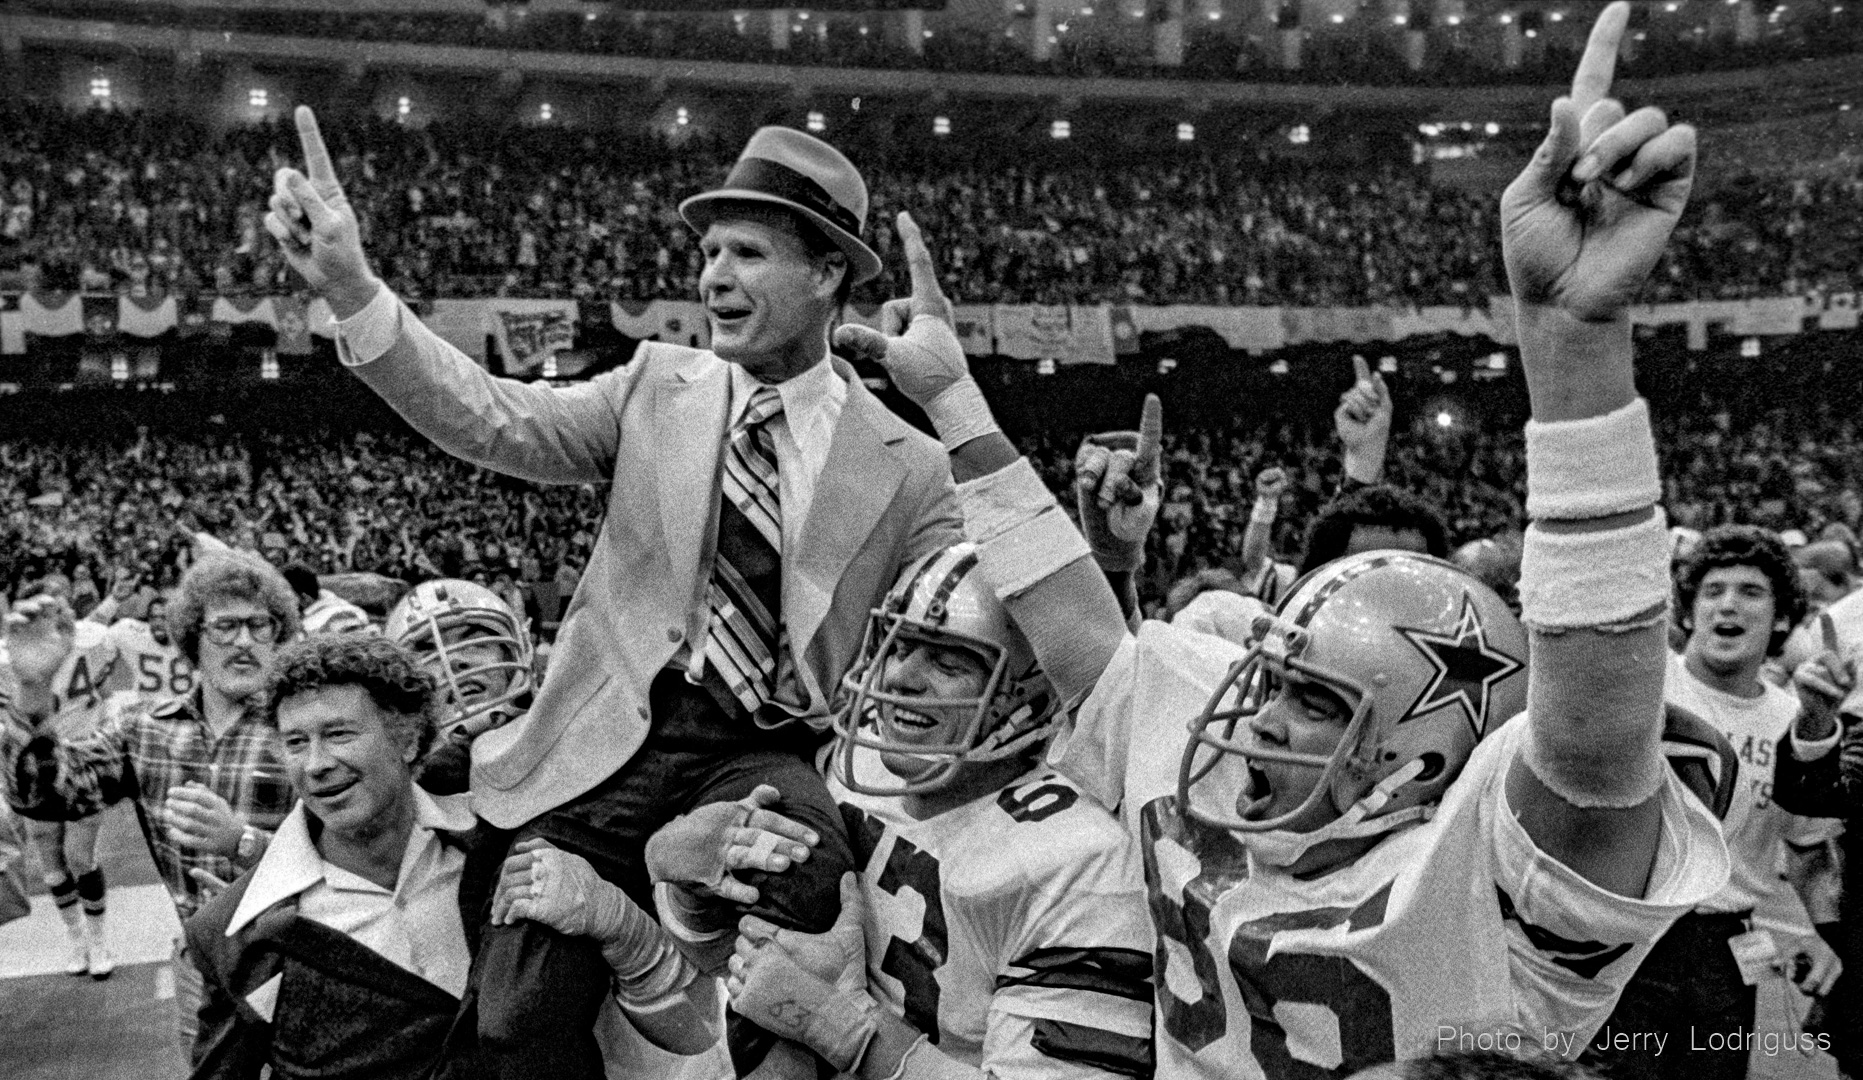 Dallas coach Tom Landry is carried off the field after the Cowboys beat the Denver Broncos 27-10 to win Super Bowl XII in the Superdome in New Orleans on January 15, 1978.